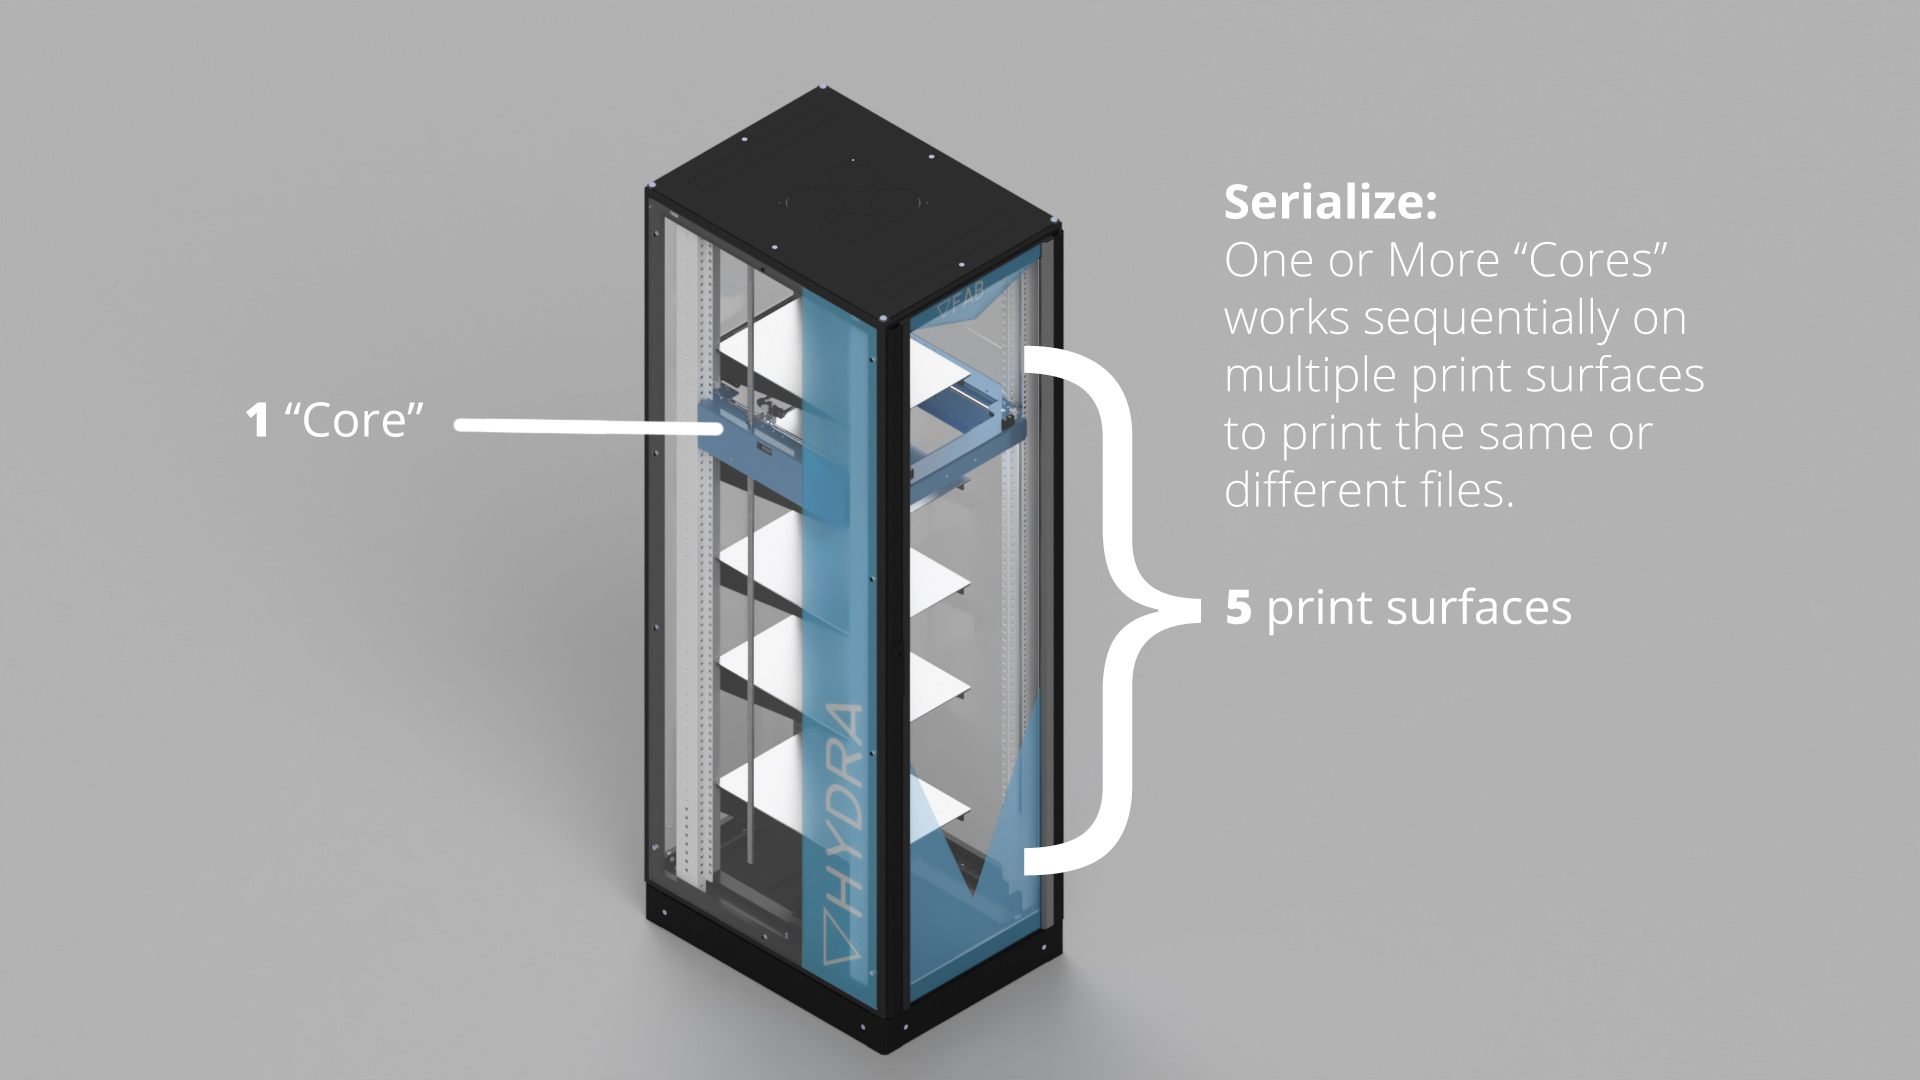 Serialize your 3D printing: work sequentially on multiple 3D print surfaces